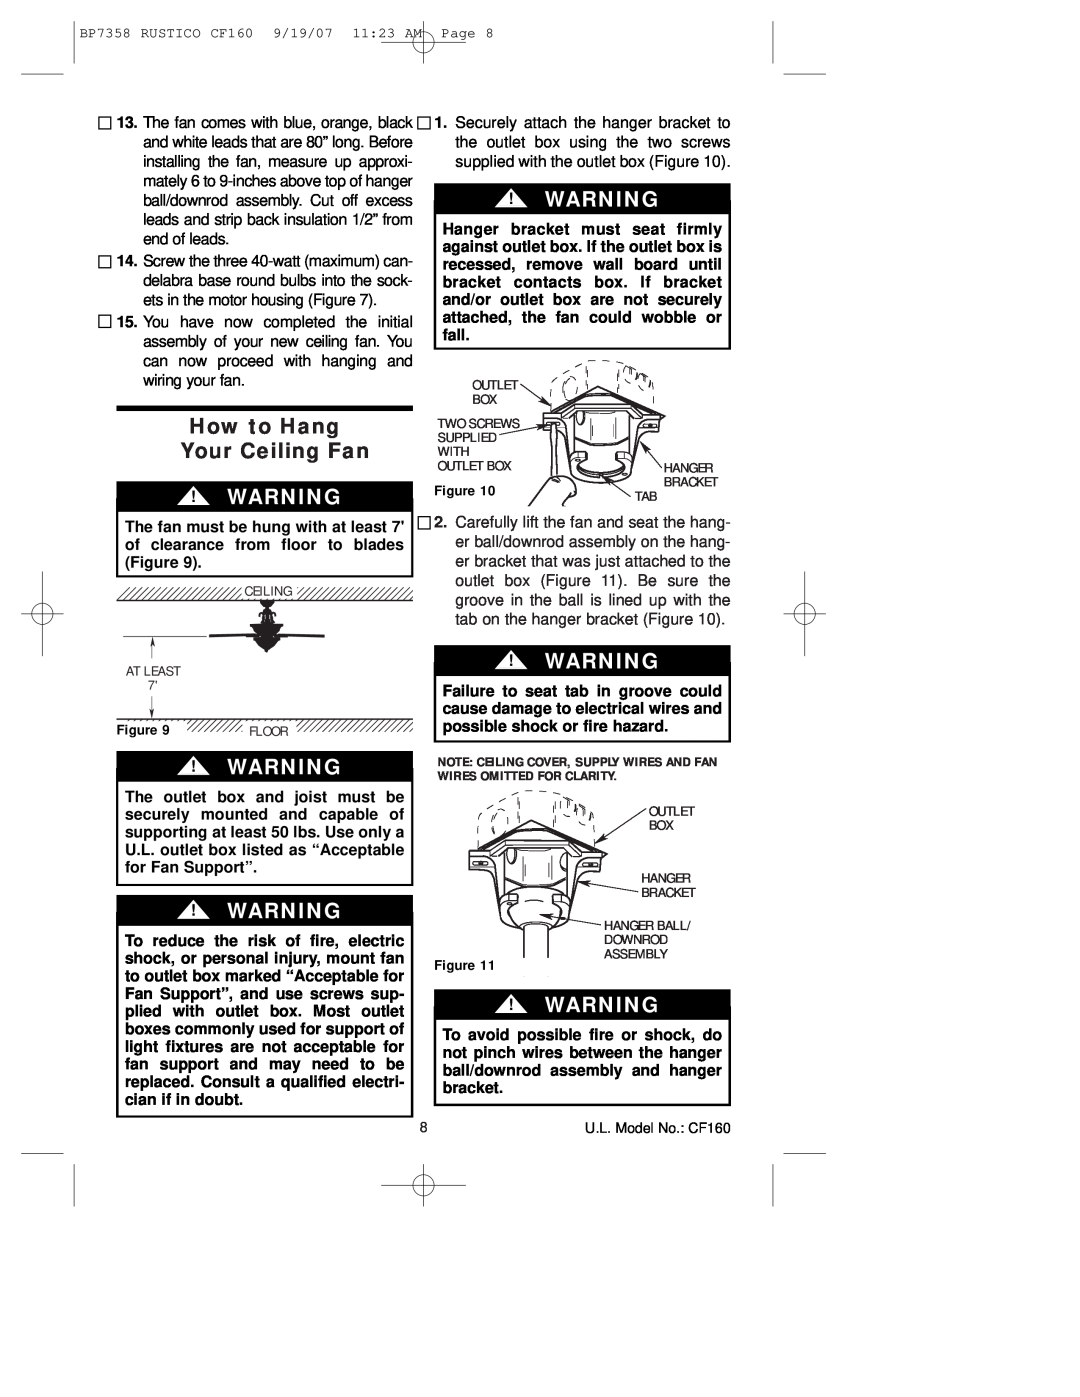 Emerson CF160 owner manual How to Hang, Your Ceiling Fan 